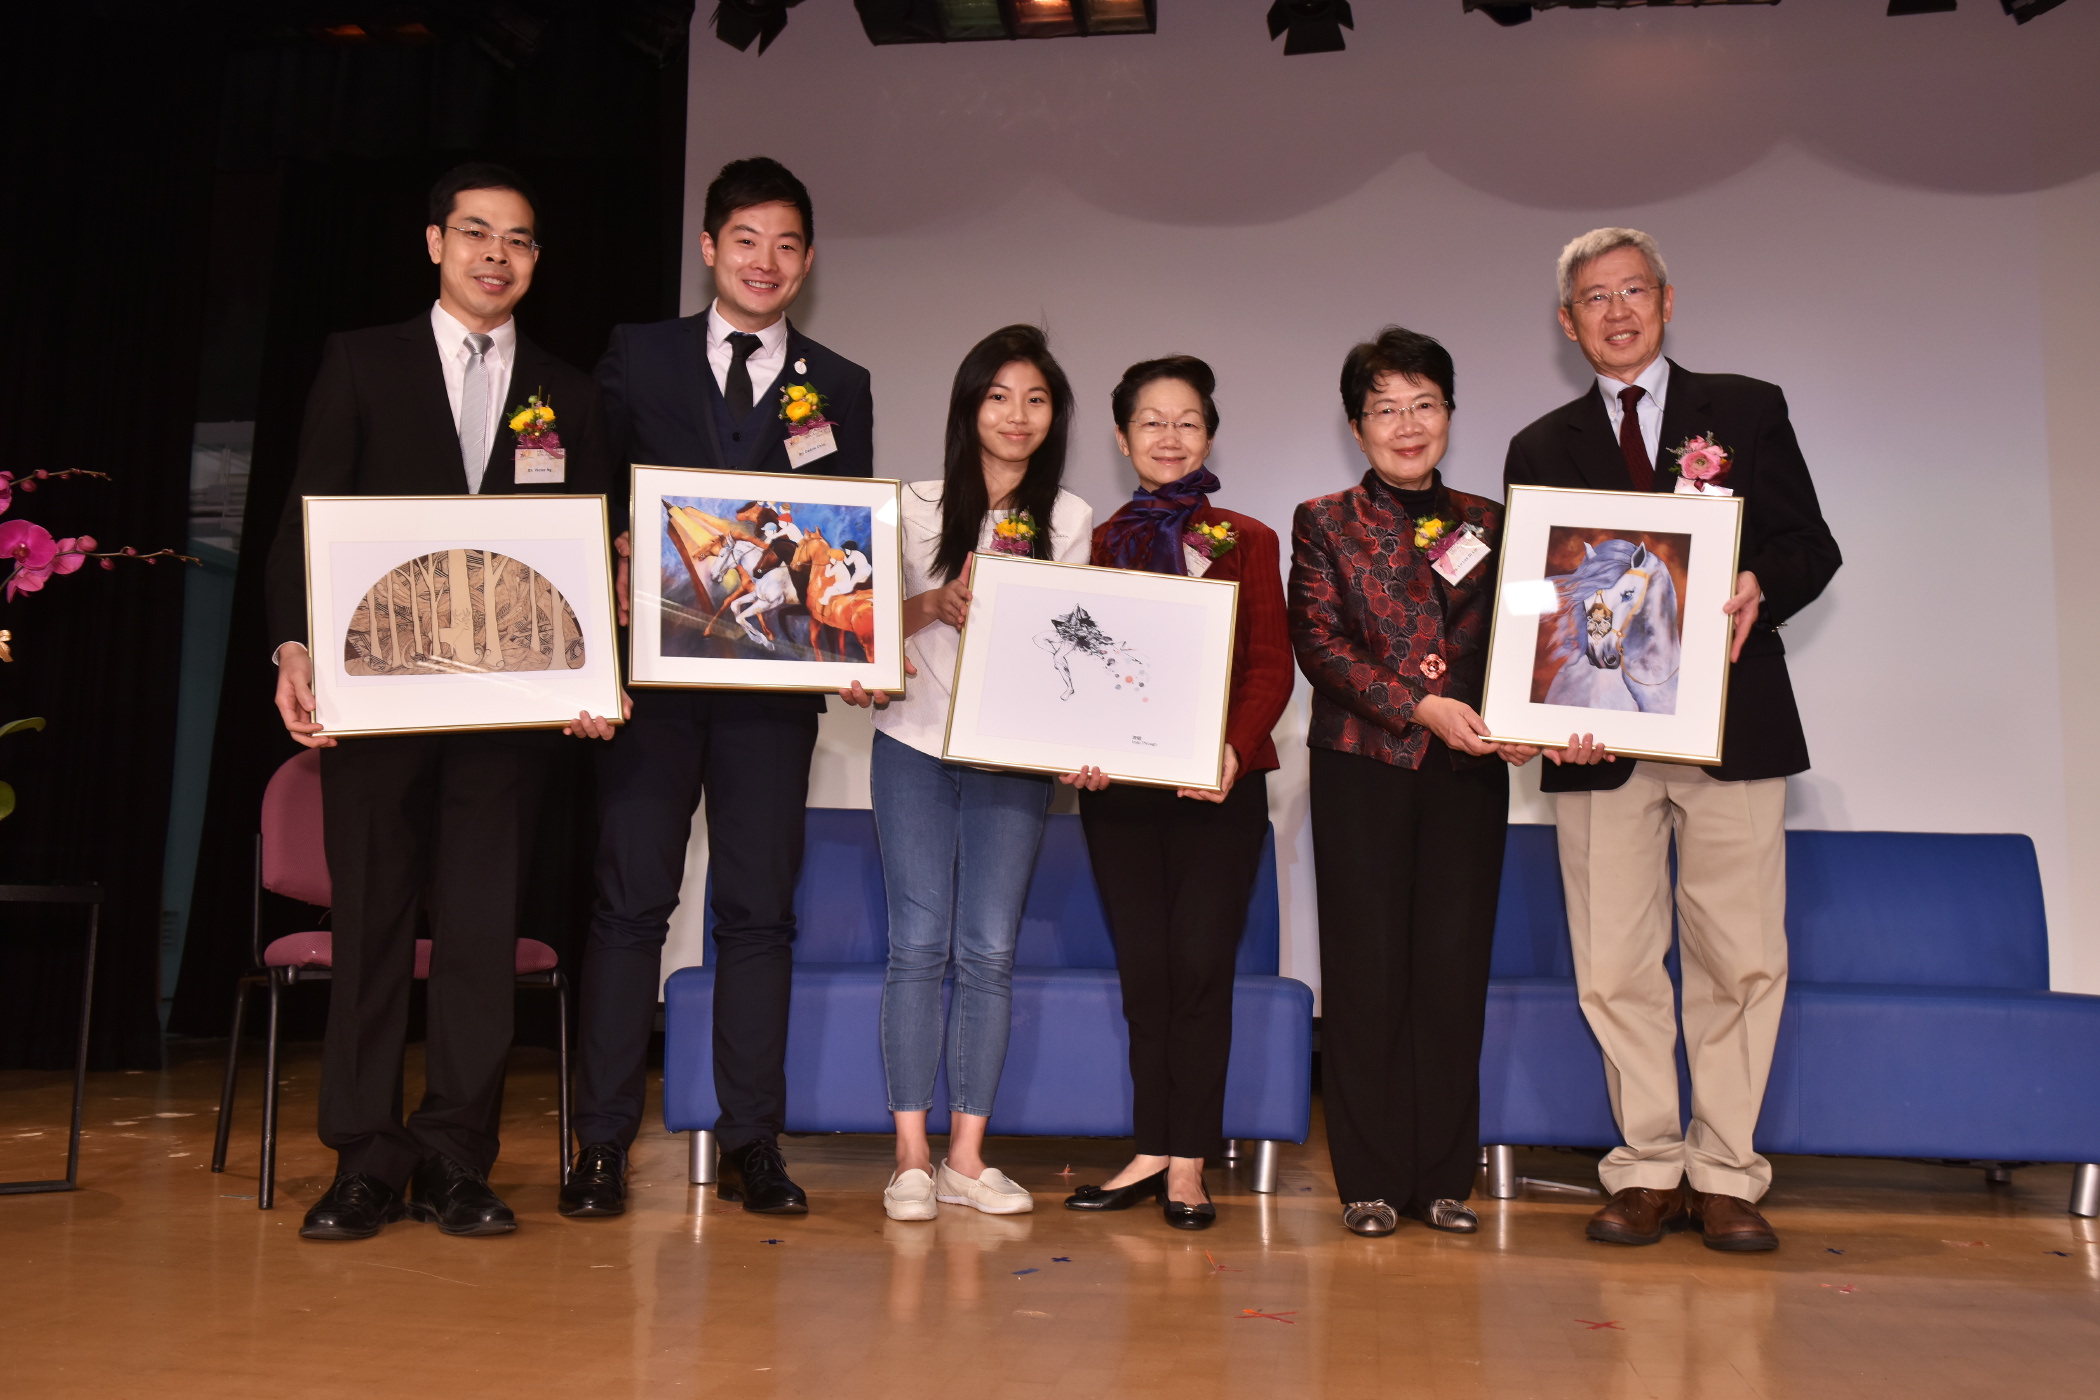 HKUGA Education Foundation Symposium: “Shaping Stars of Tomorrow”. From the left: Dr. Victor Ng, Dr. Cedric Chiu, Ms. Vicky Kung, Dr. Shen Shir Ming, Mrs. Irene Lo and Prof. Cheng Kai Ming.